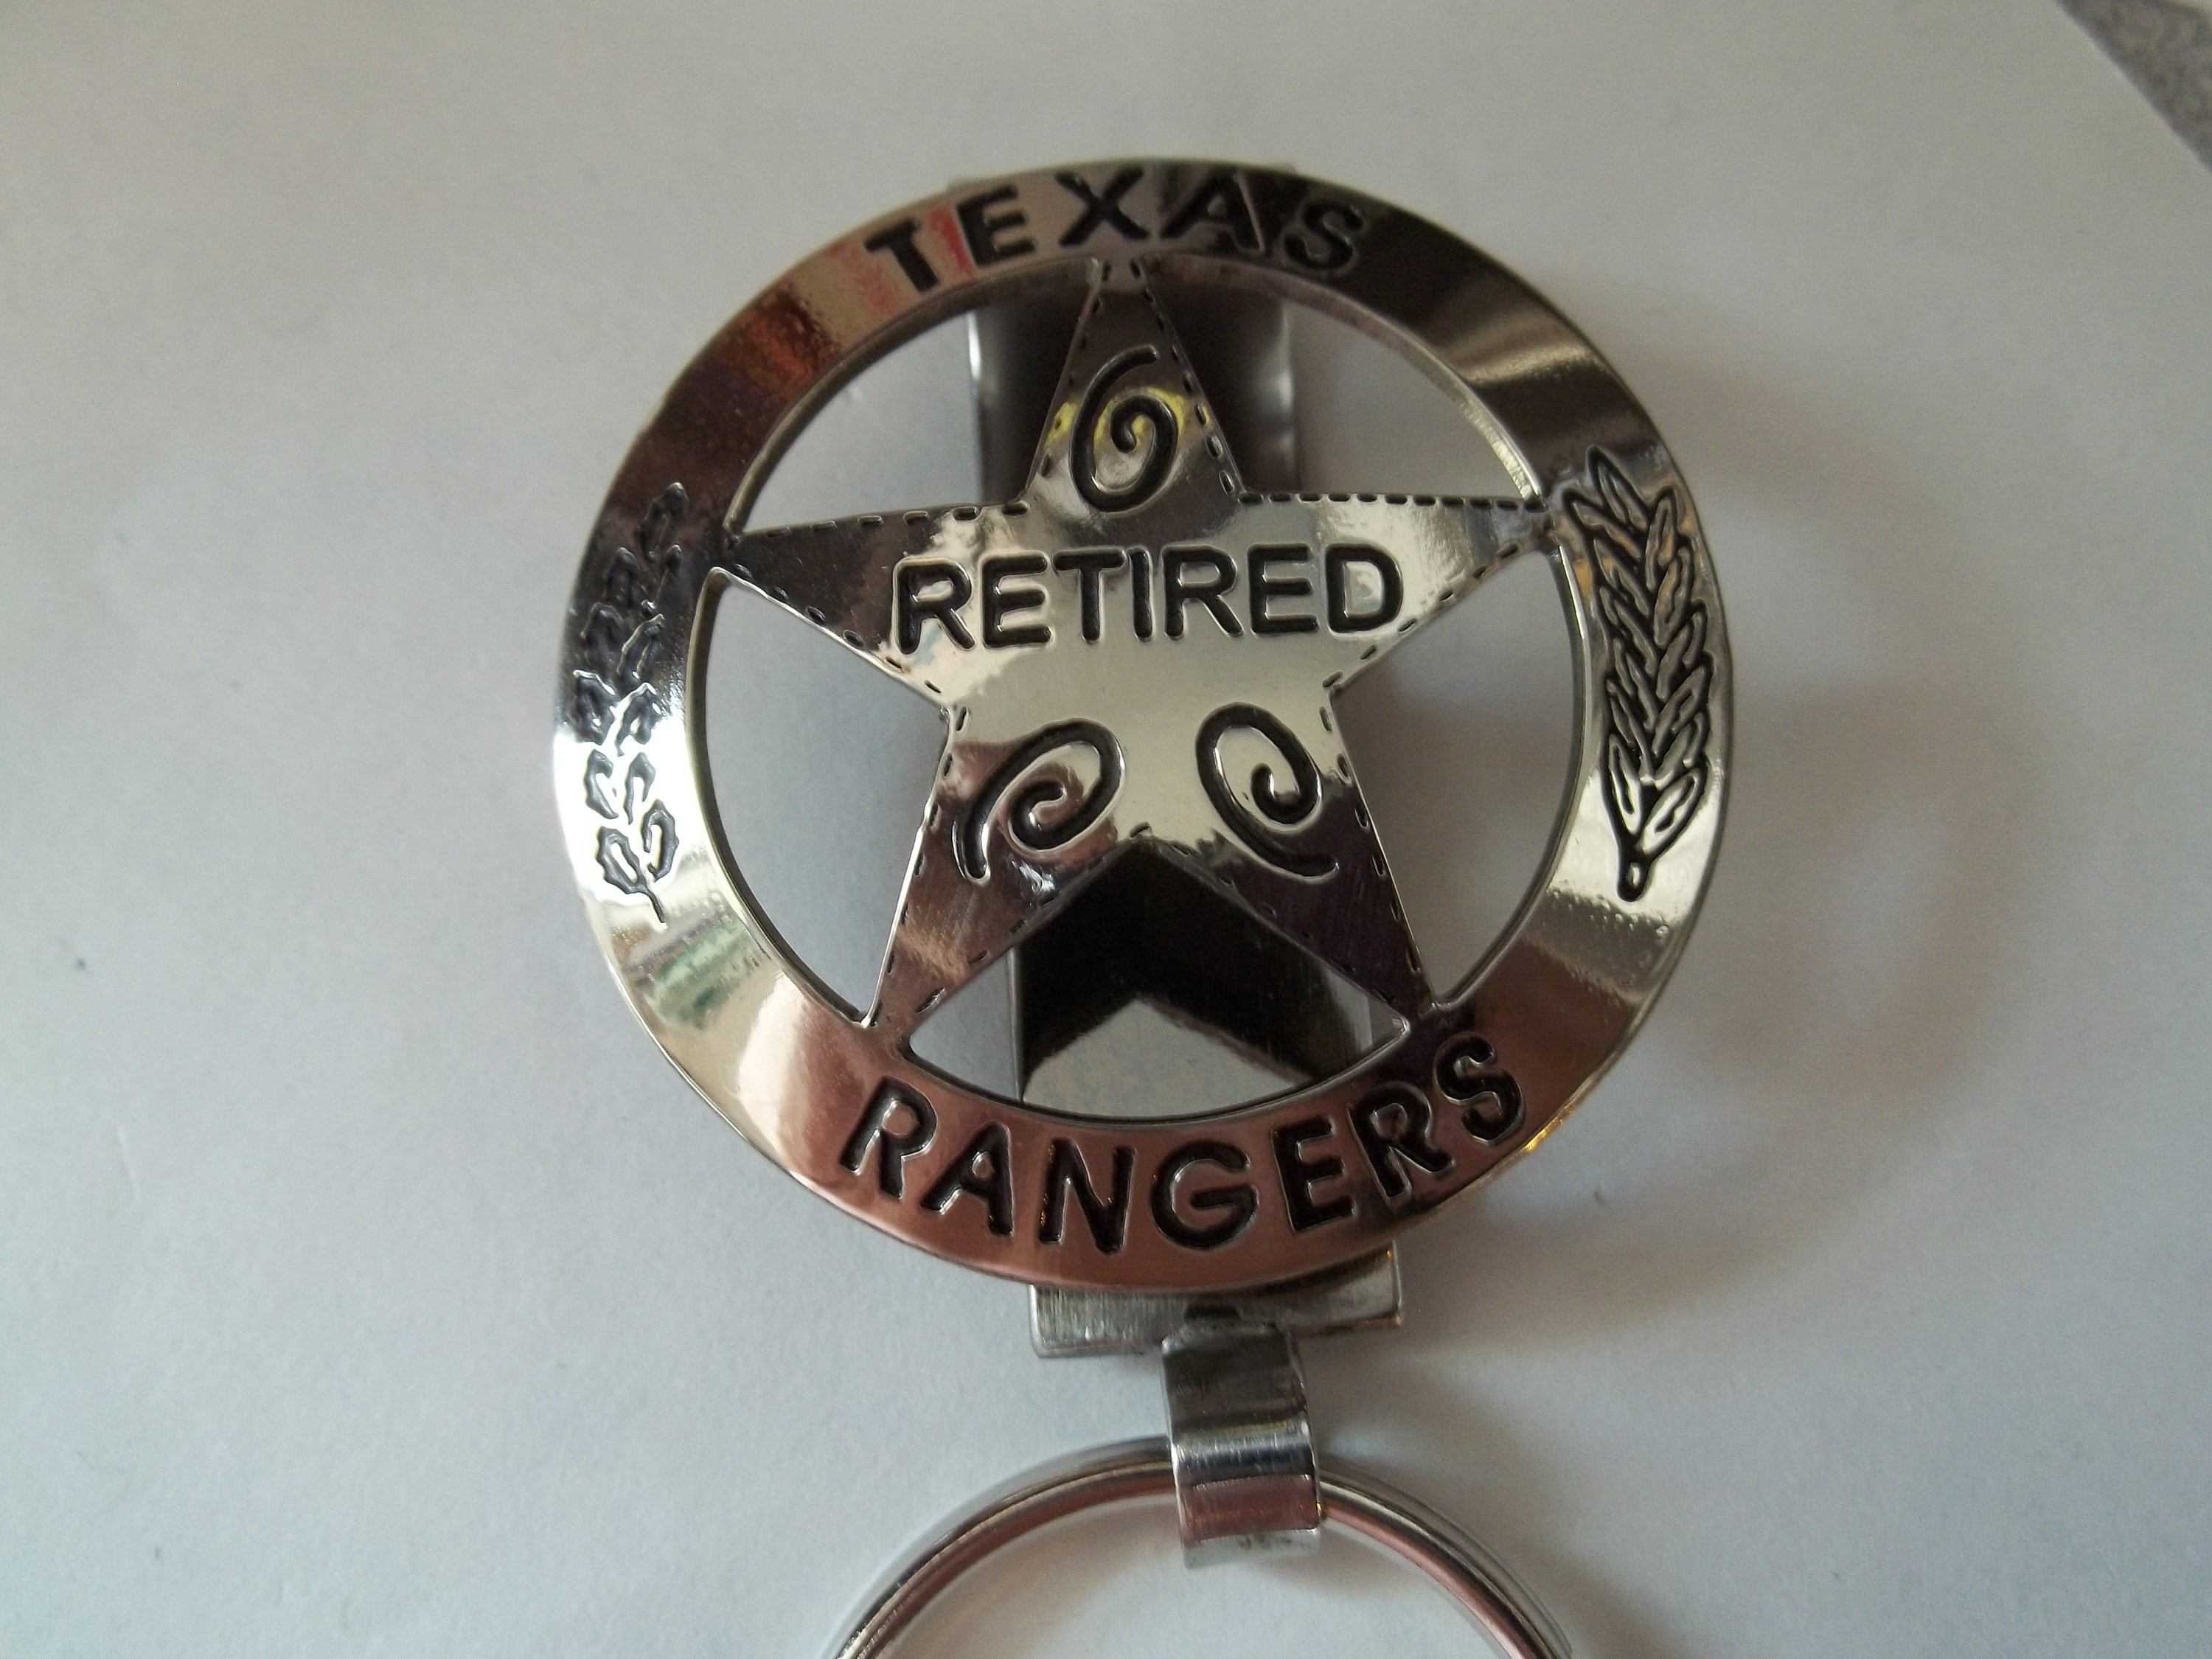 TEXAS RANGER BADGE – 1 TROY OUNCE – 39MM (ANTIQUE FINISH) – Limited Mintage